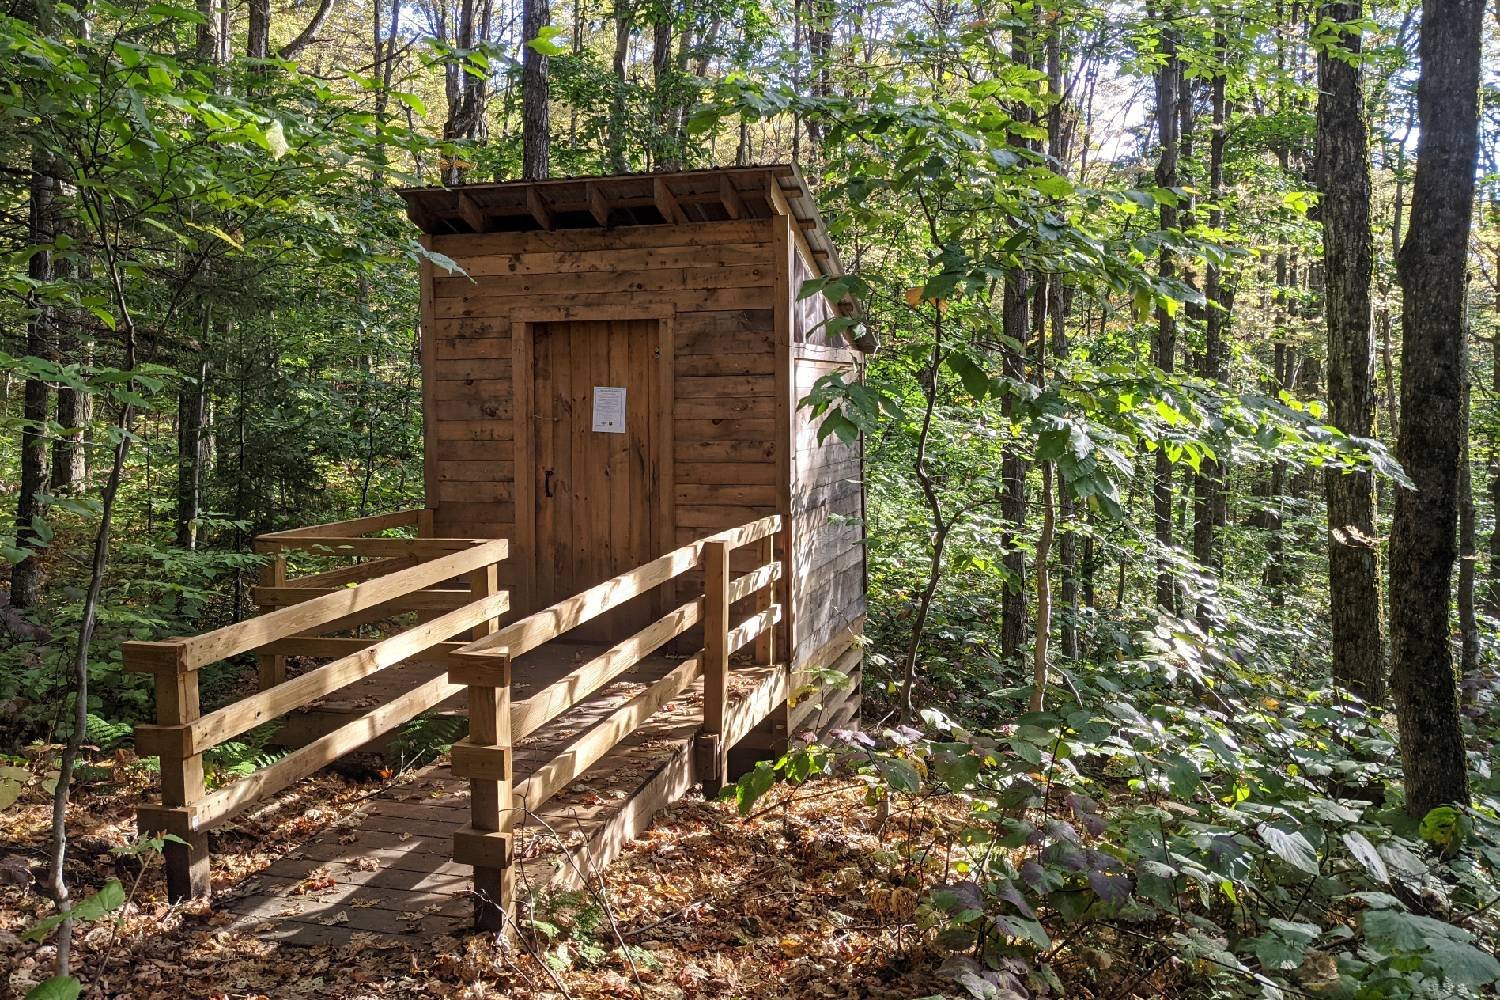 A privy on the Long Trail